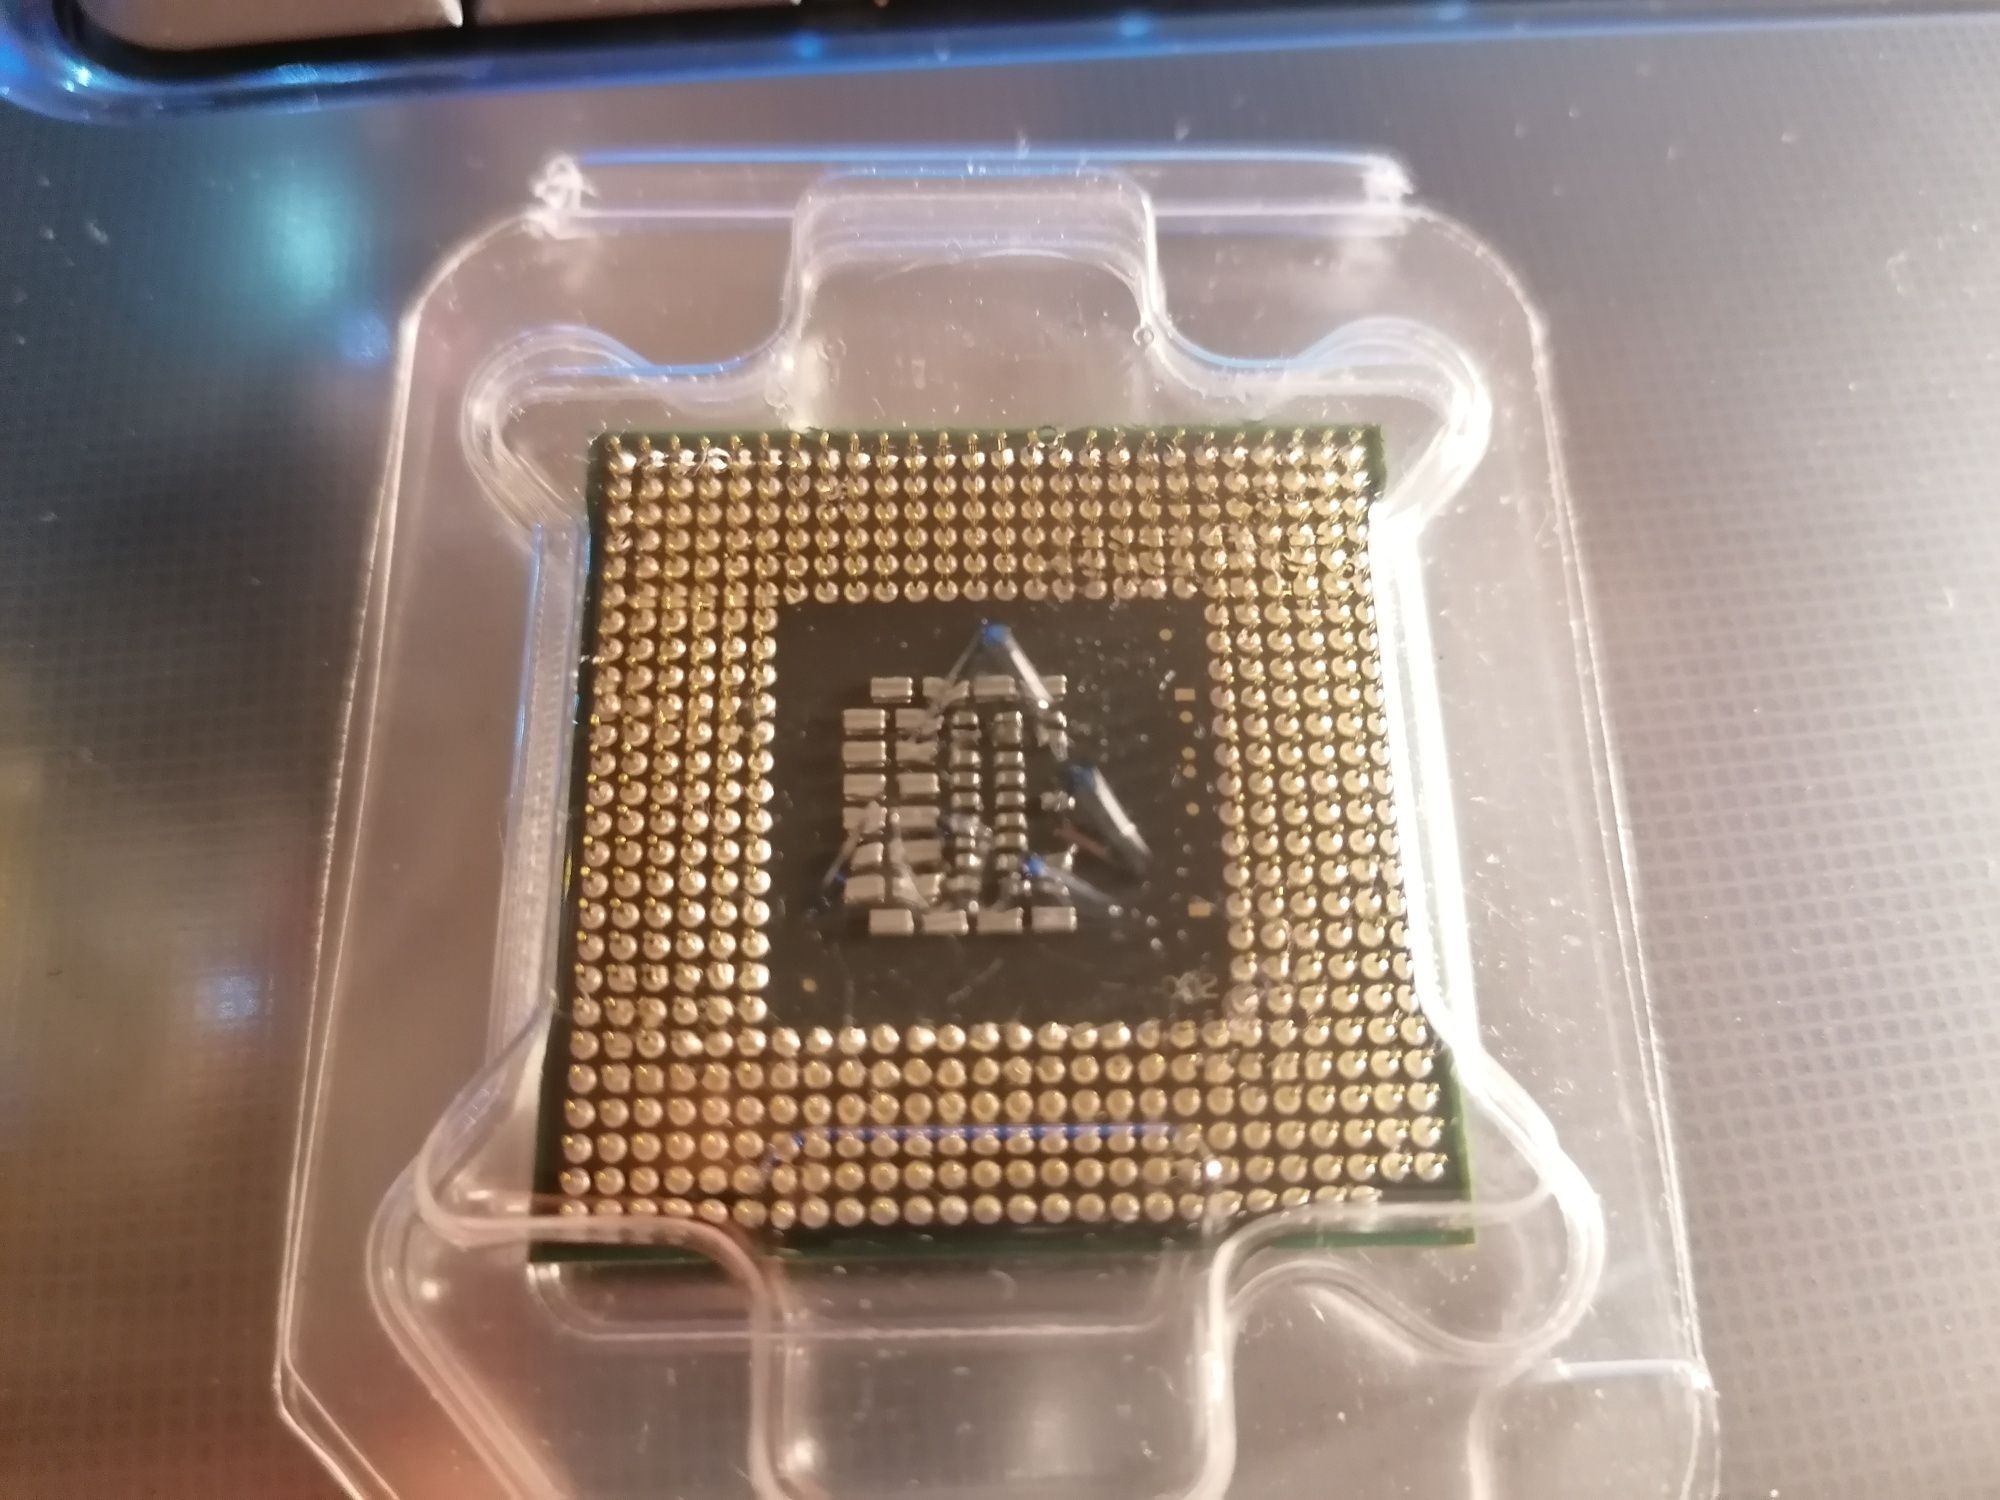 Intel core 2 duo T9400, 2.5Ghz, 1066Mhz, 6M